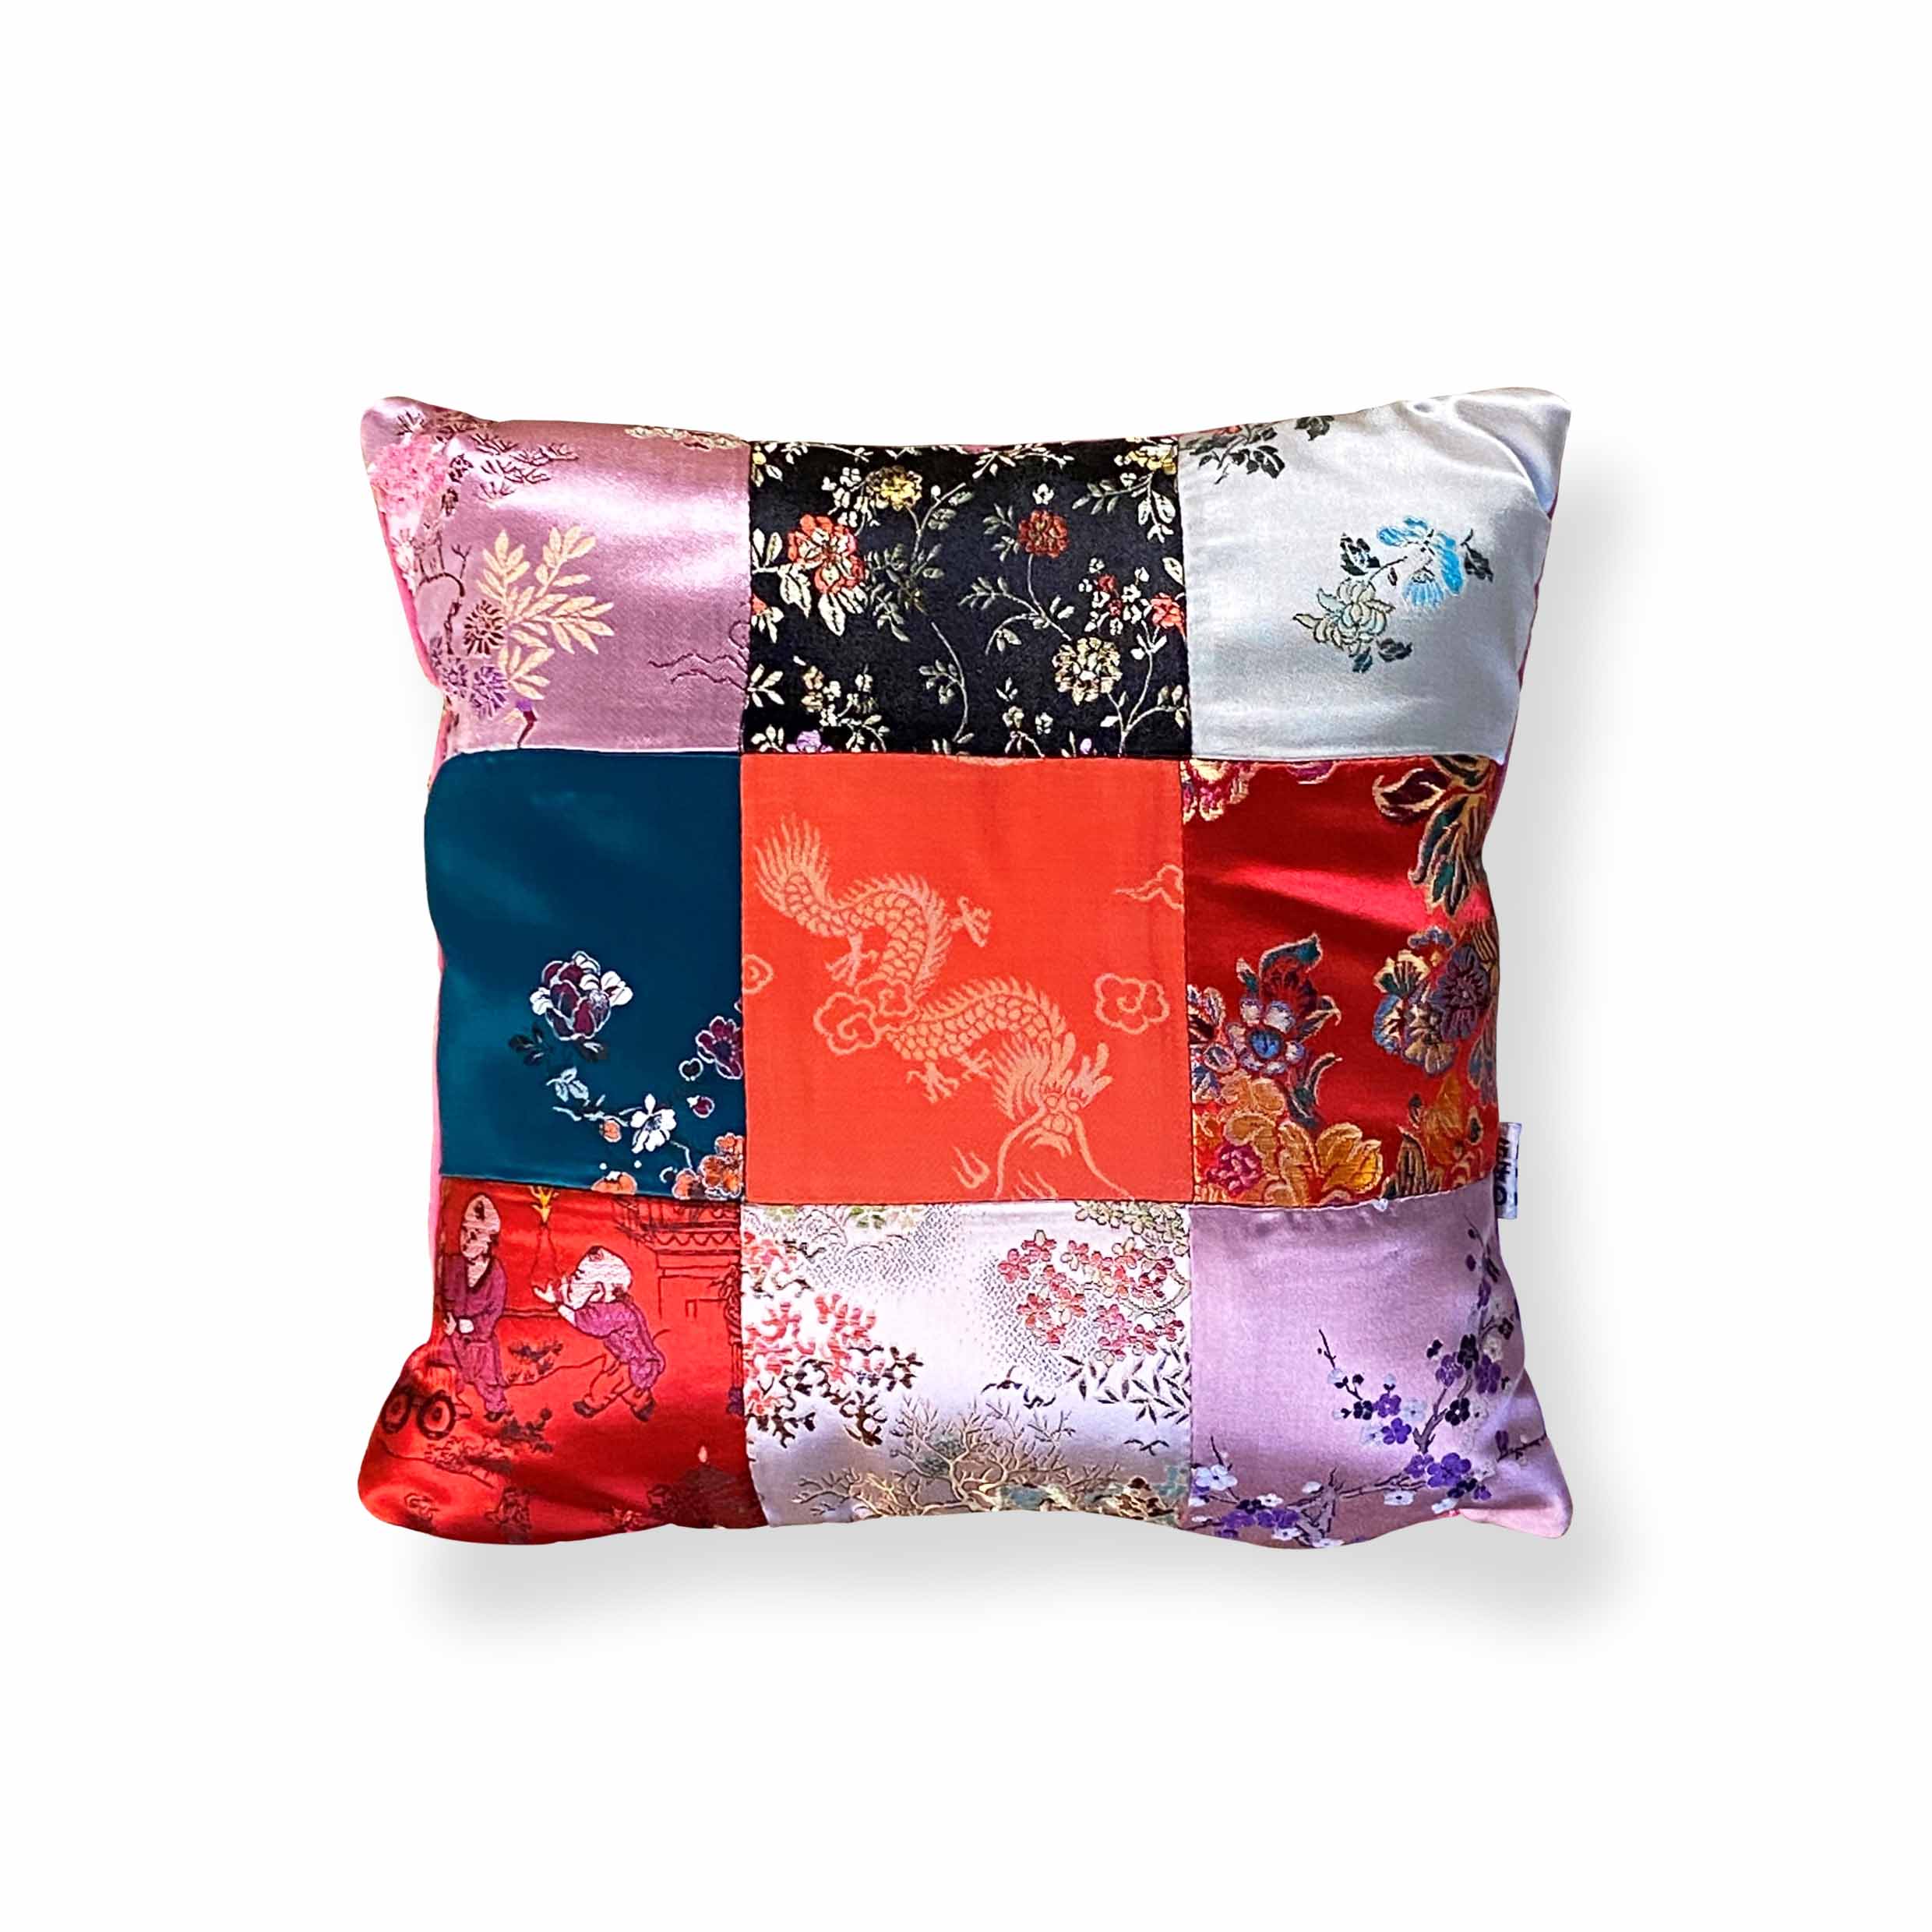 Patchwork Embroidery Print Cushion, 30 x 30 cm